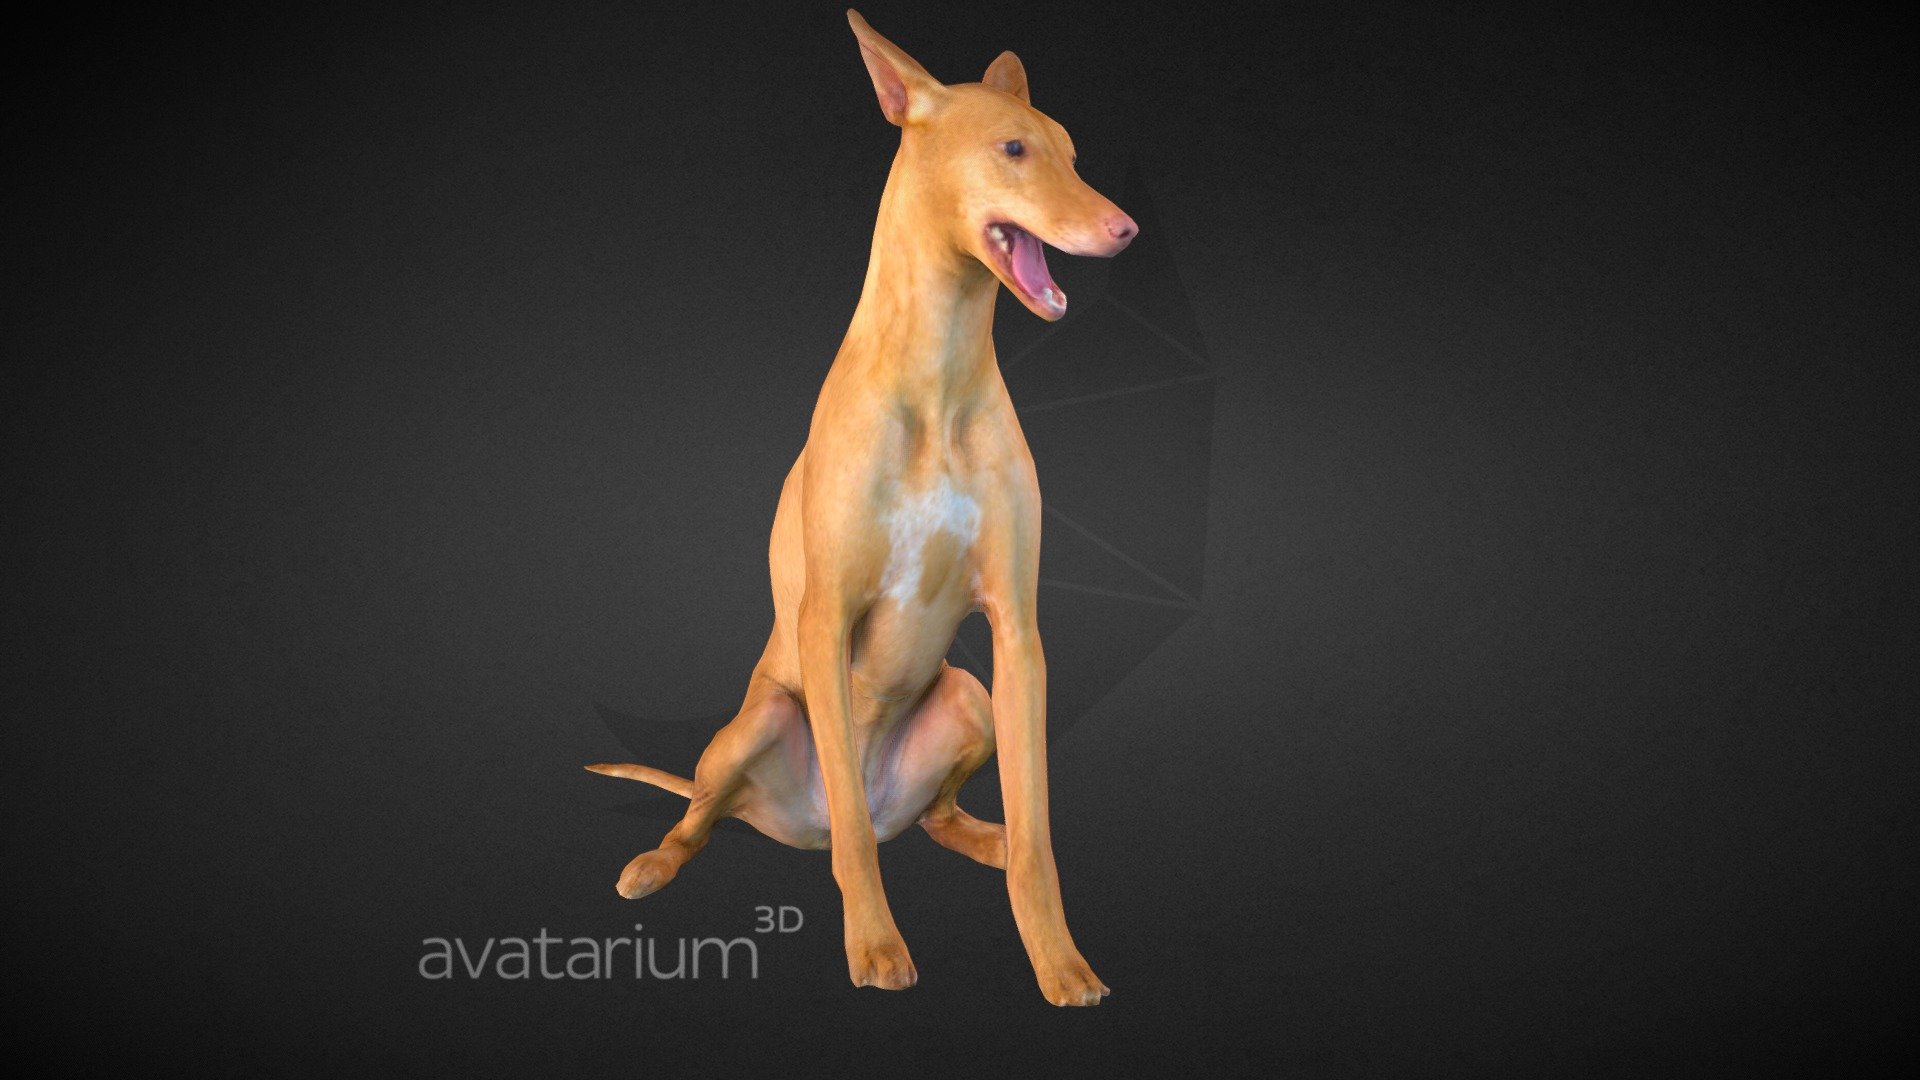 Pharaoh Hound Dog 3d captured and cleaned up in zBrush. Ready for 3d printing and a great game asset 3d model